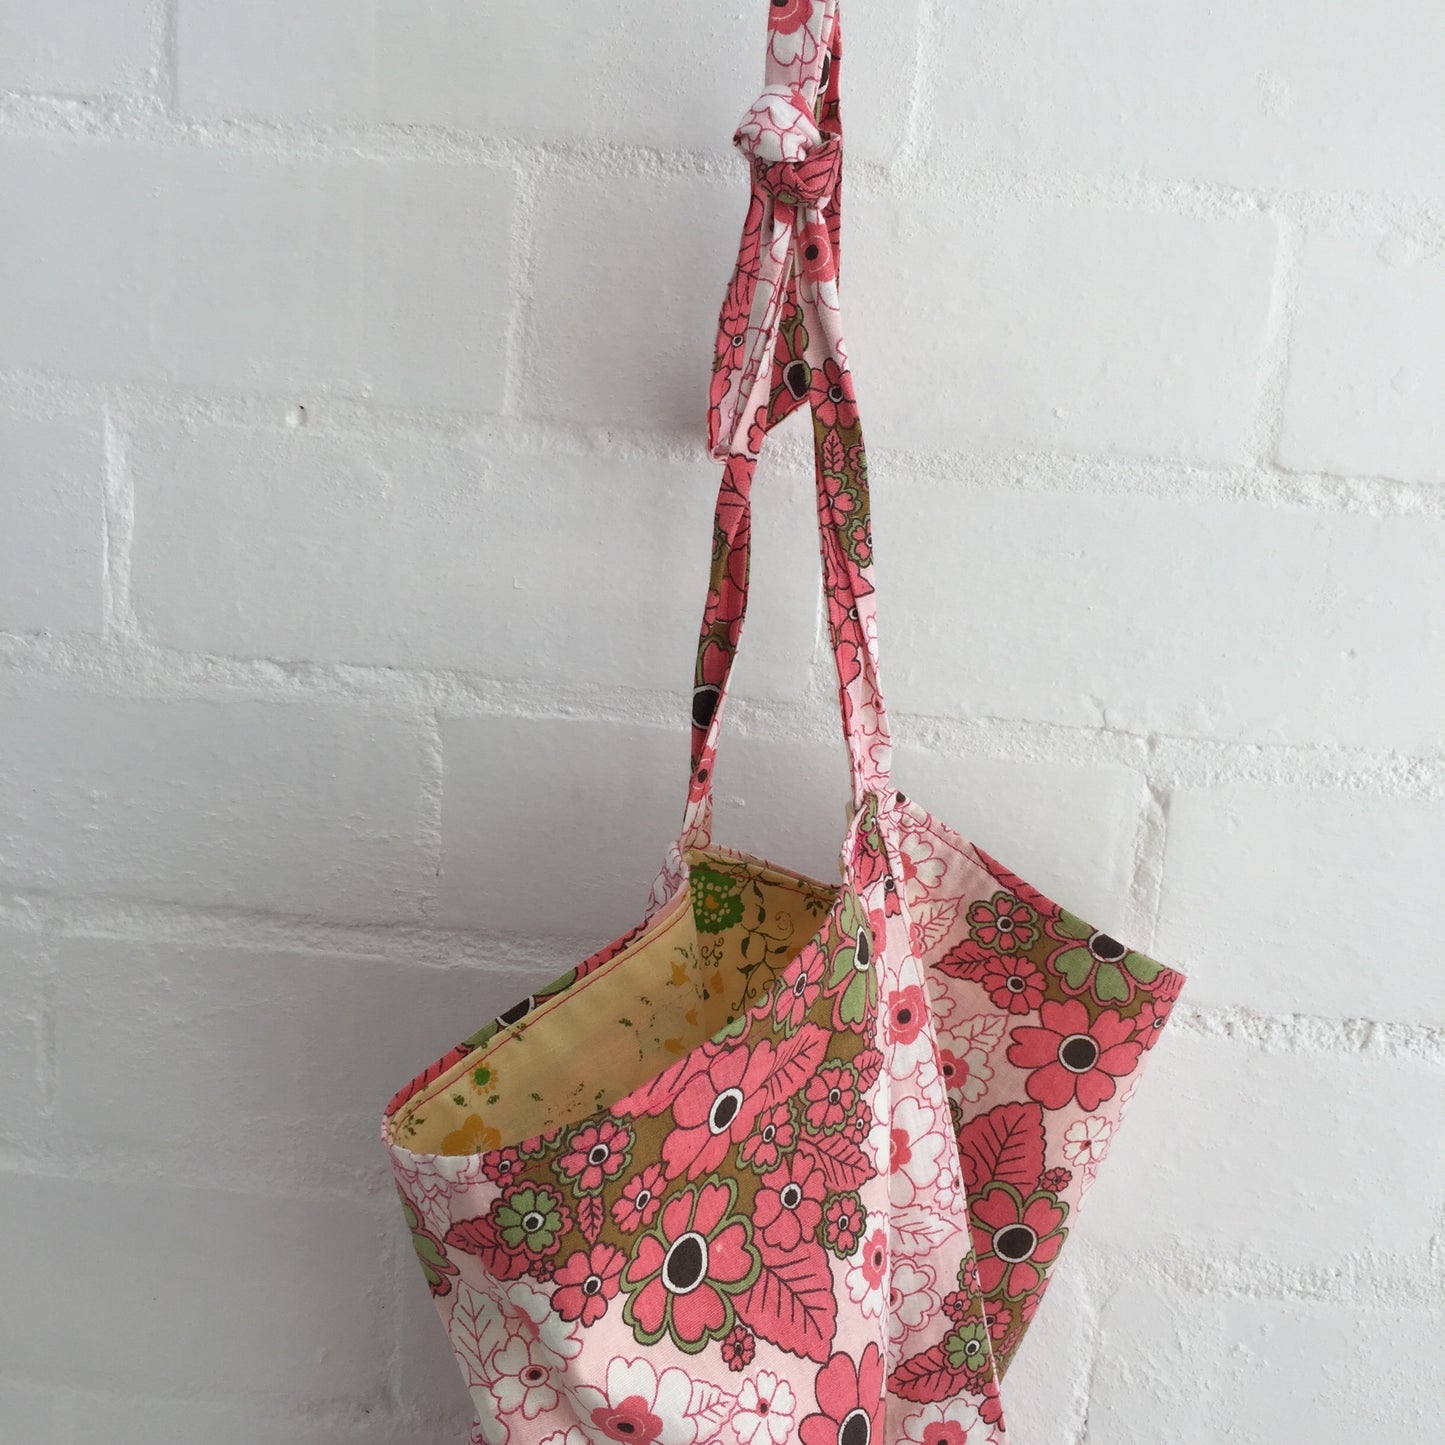 Vintage FABRIC Double Sided TOTE Handmade BAG Floral ADORABLE Shopping Market